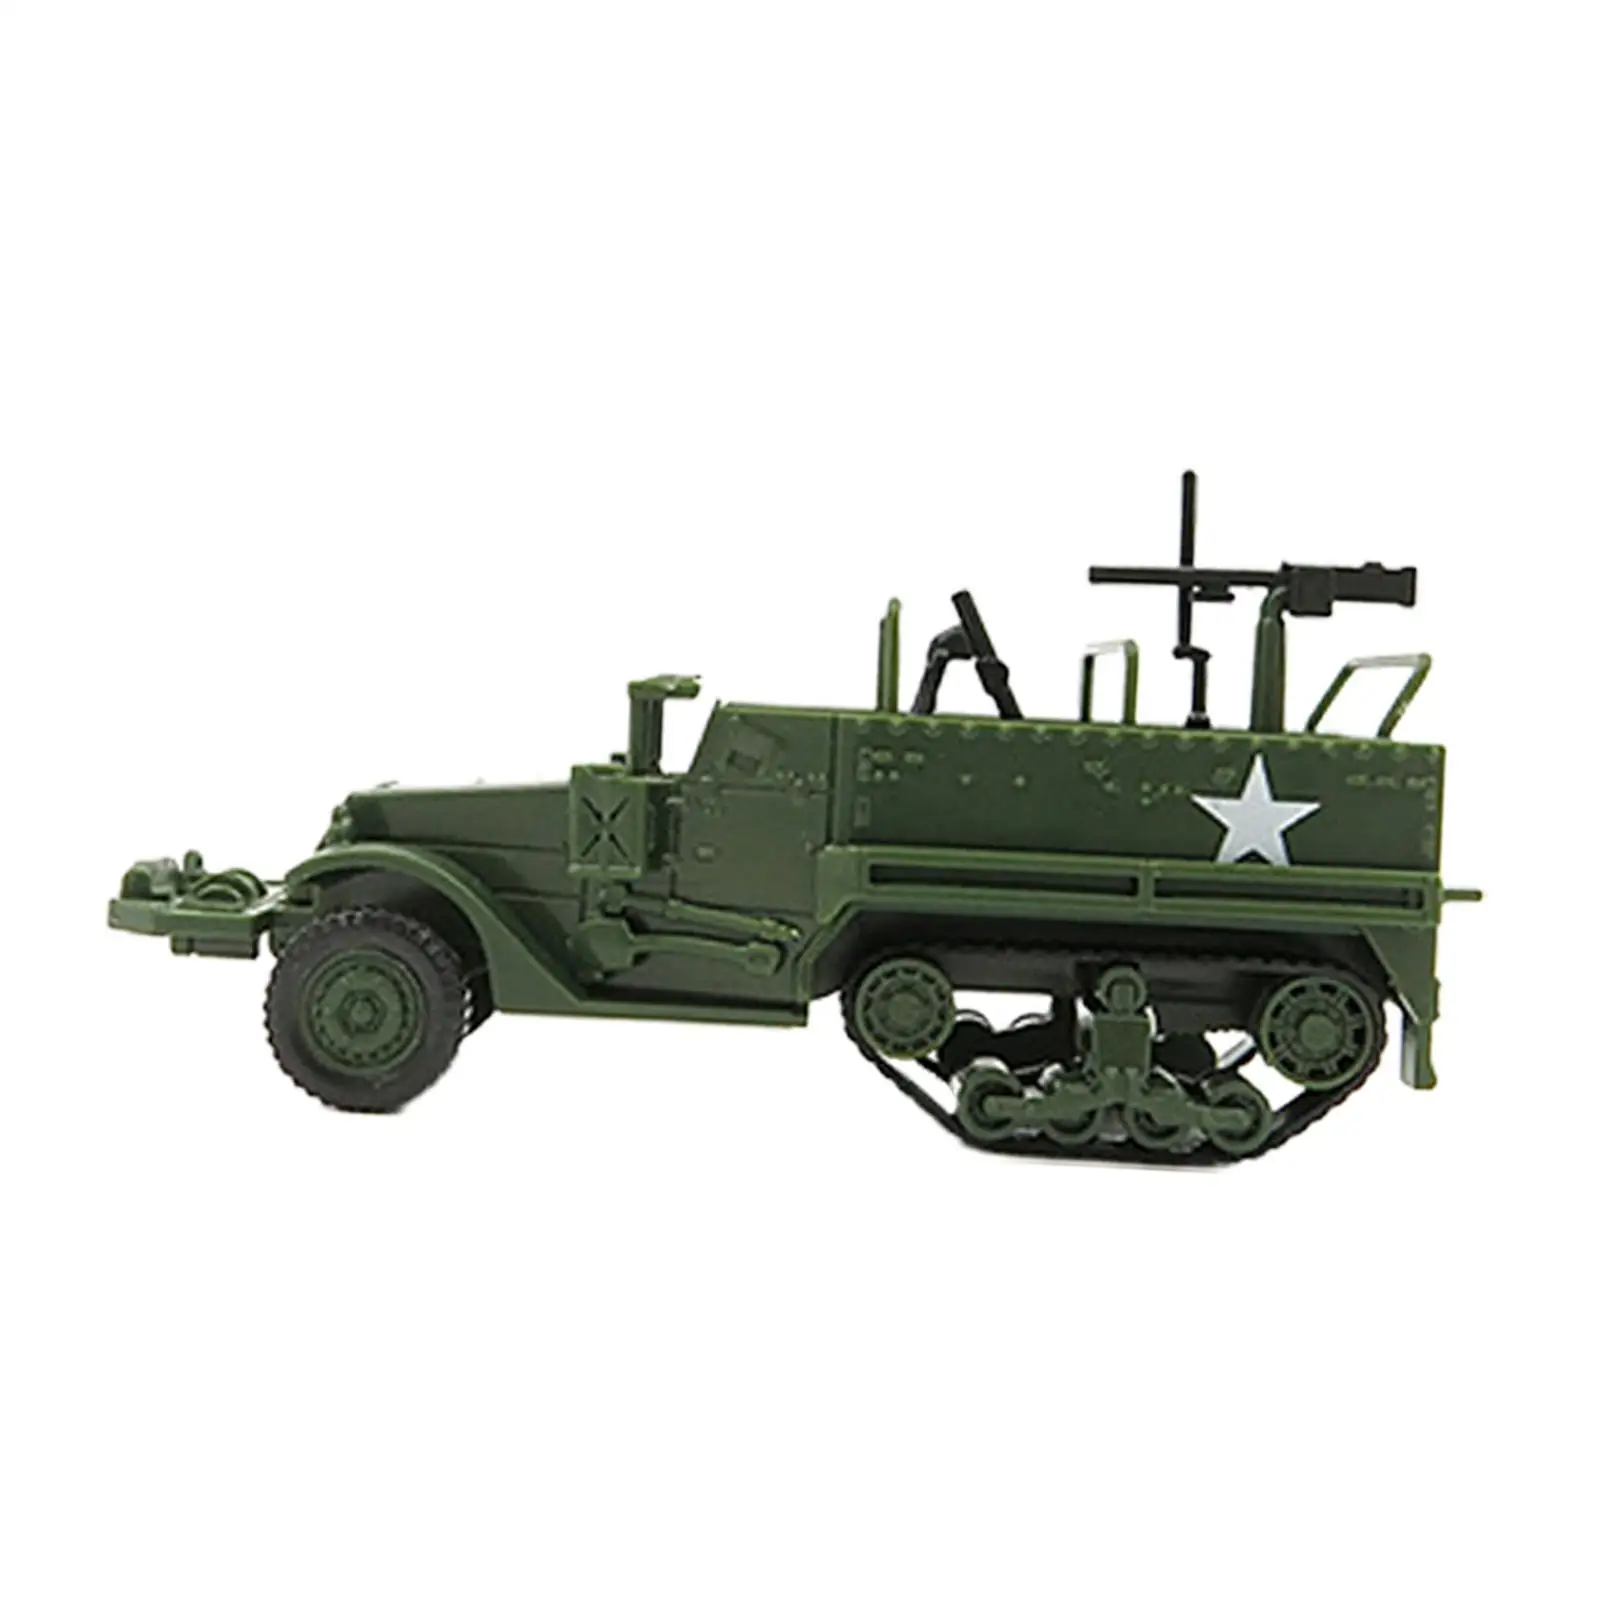 1:72 Scale Tank Model Desk Decor Collectables Kids Playset Tank Truck 4D Model Mini Vehicles for Children Kids Teens Boys Gifts